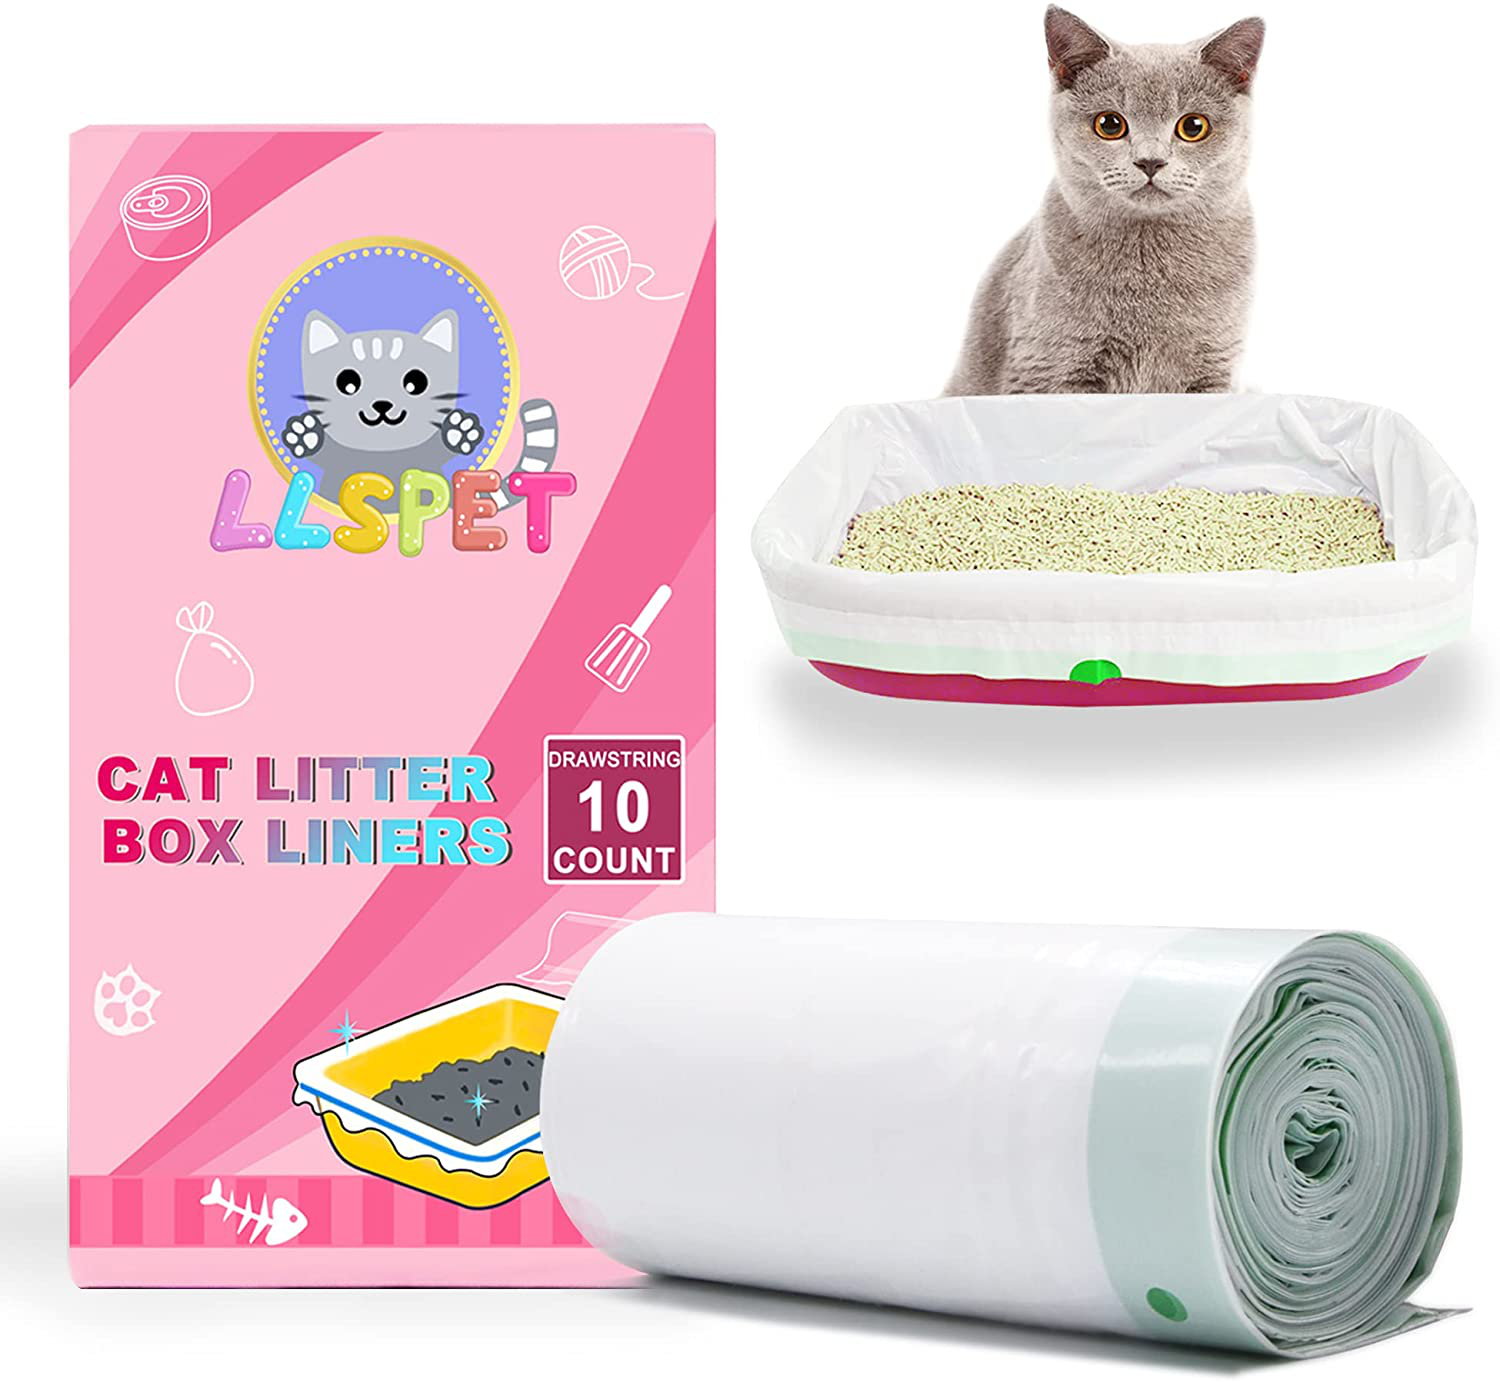 LLSPET Cat Litter Bags Valu-Pack of 10 Counts, Thicken Durable Litter Box Liner for Cats, Drawstring Pets Trash Bags -Tear Resistance,Without Odor (10 Count, 35.8IN17.7IN) Animals & Pet Supplies > Pet Supplies > Cat Supplies > Cat Litter Box Liners LLSPET 10 Count 35.8IN*17.7IN 